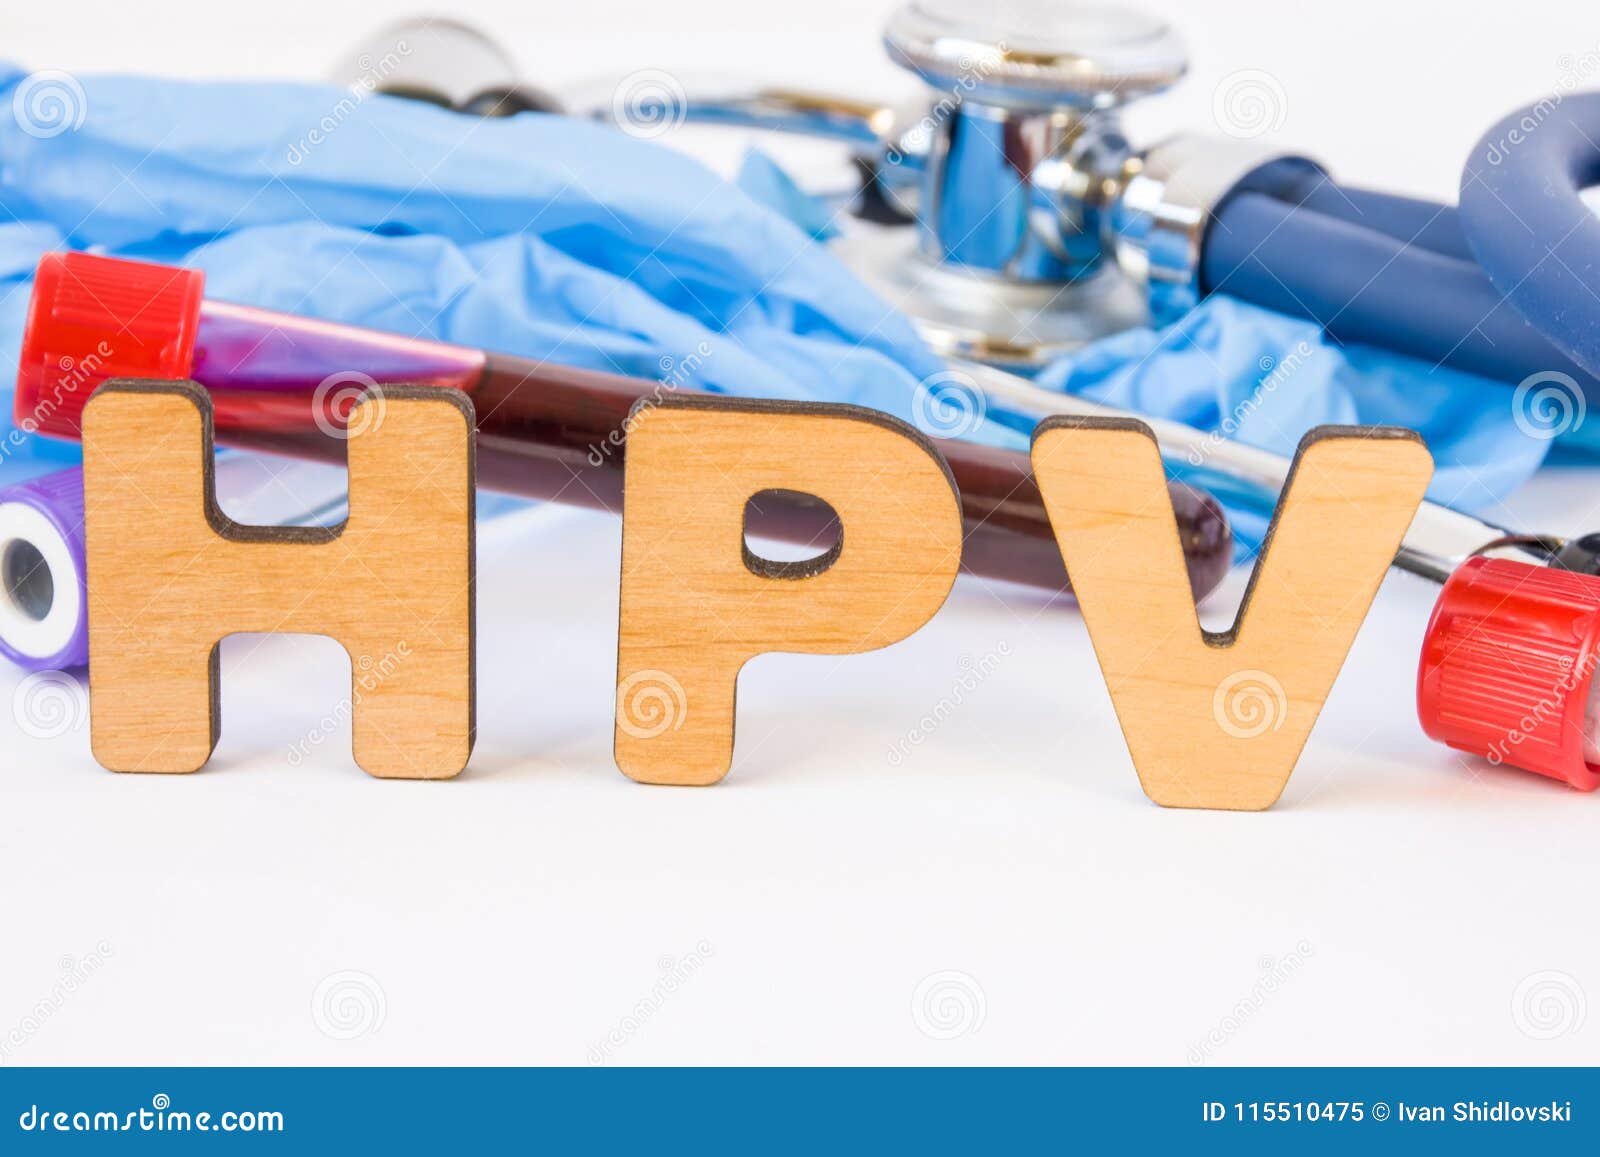 Hpv acronym meaning. Book Terminolog 2